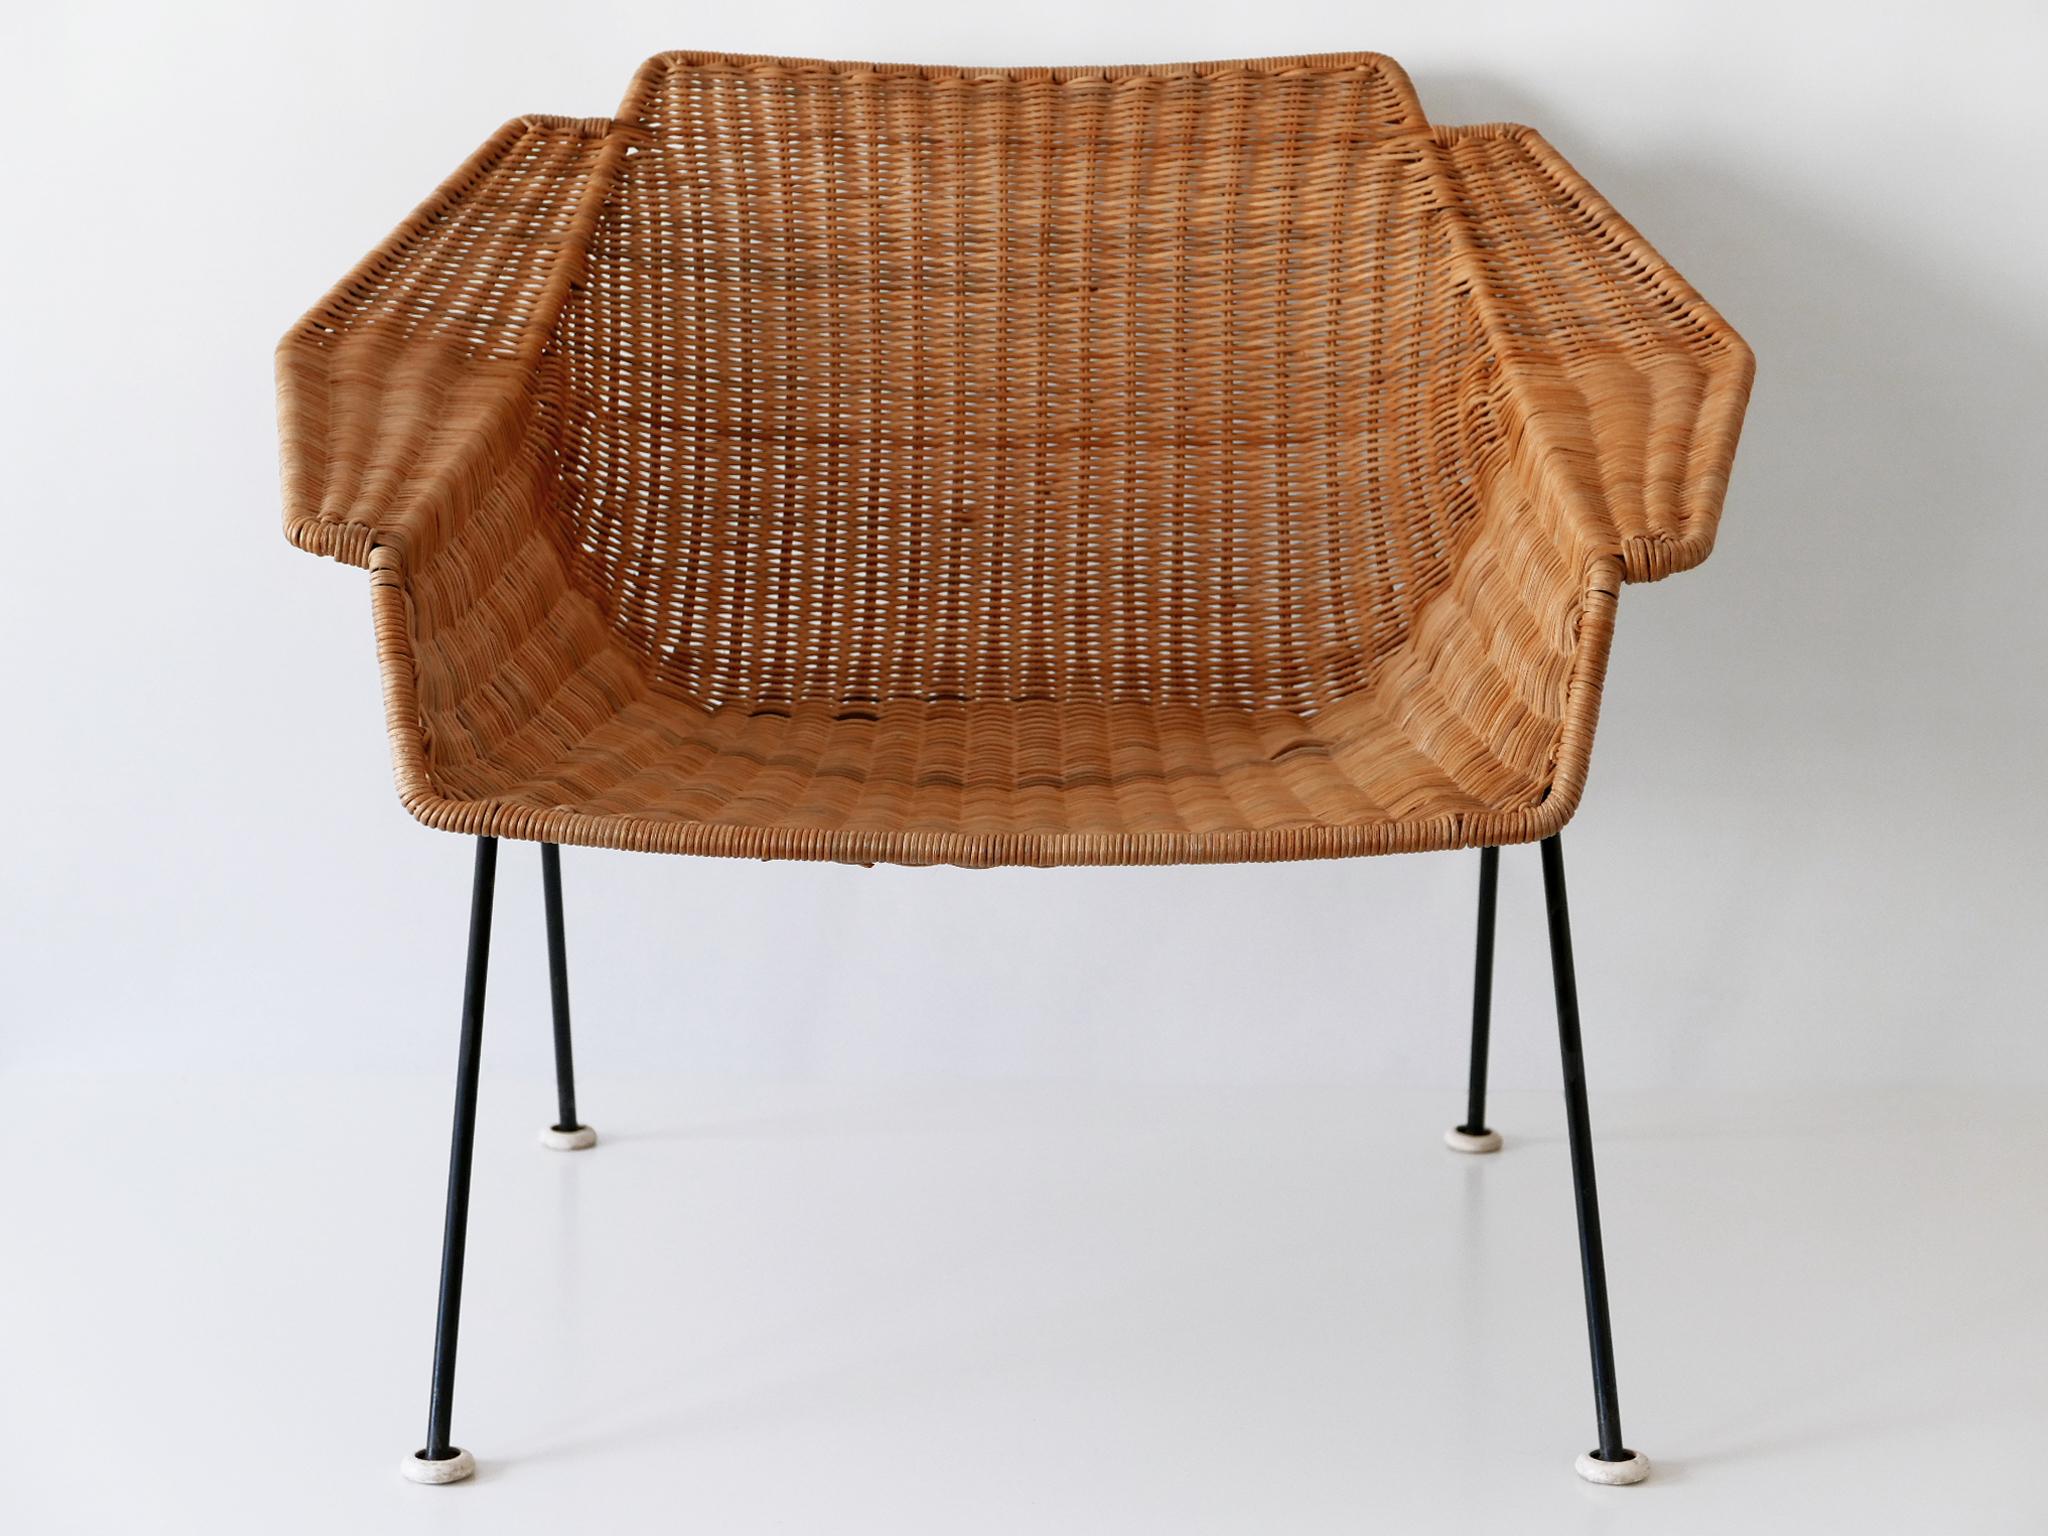 Exceptional Mid-Century Modern Wicker Lounge Chair or Armchair 1950s Sweden For Sale 1